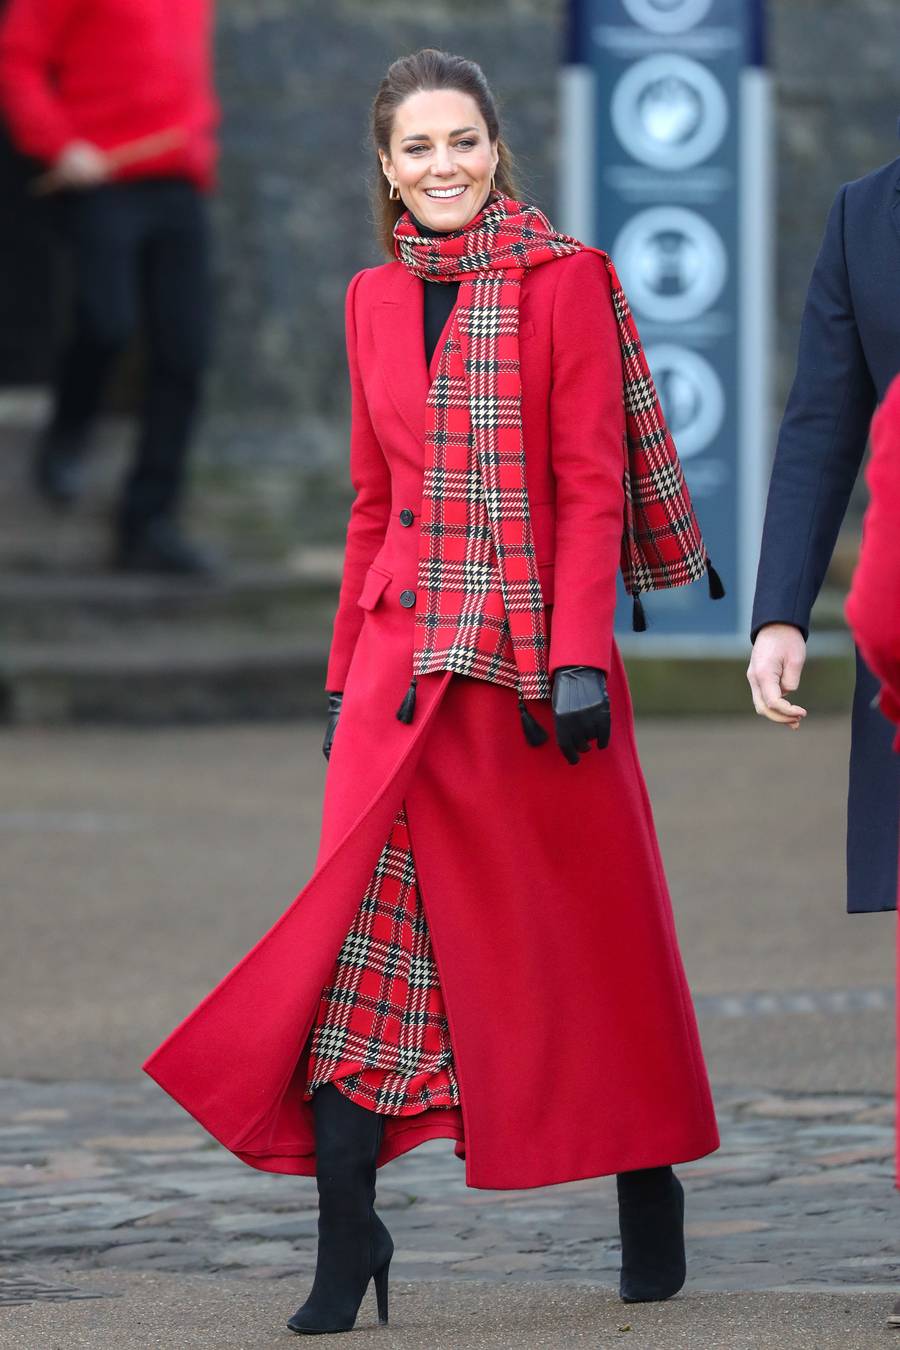 Kate Middleton  In  Red Alexander McQueen Coat  @ Cardiff Castle